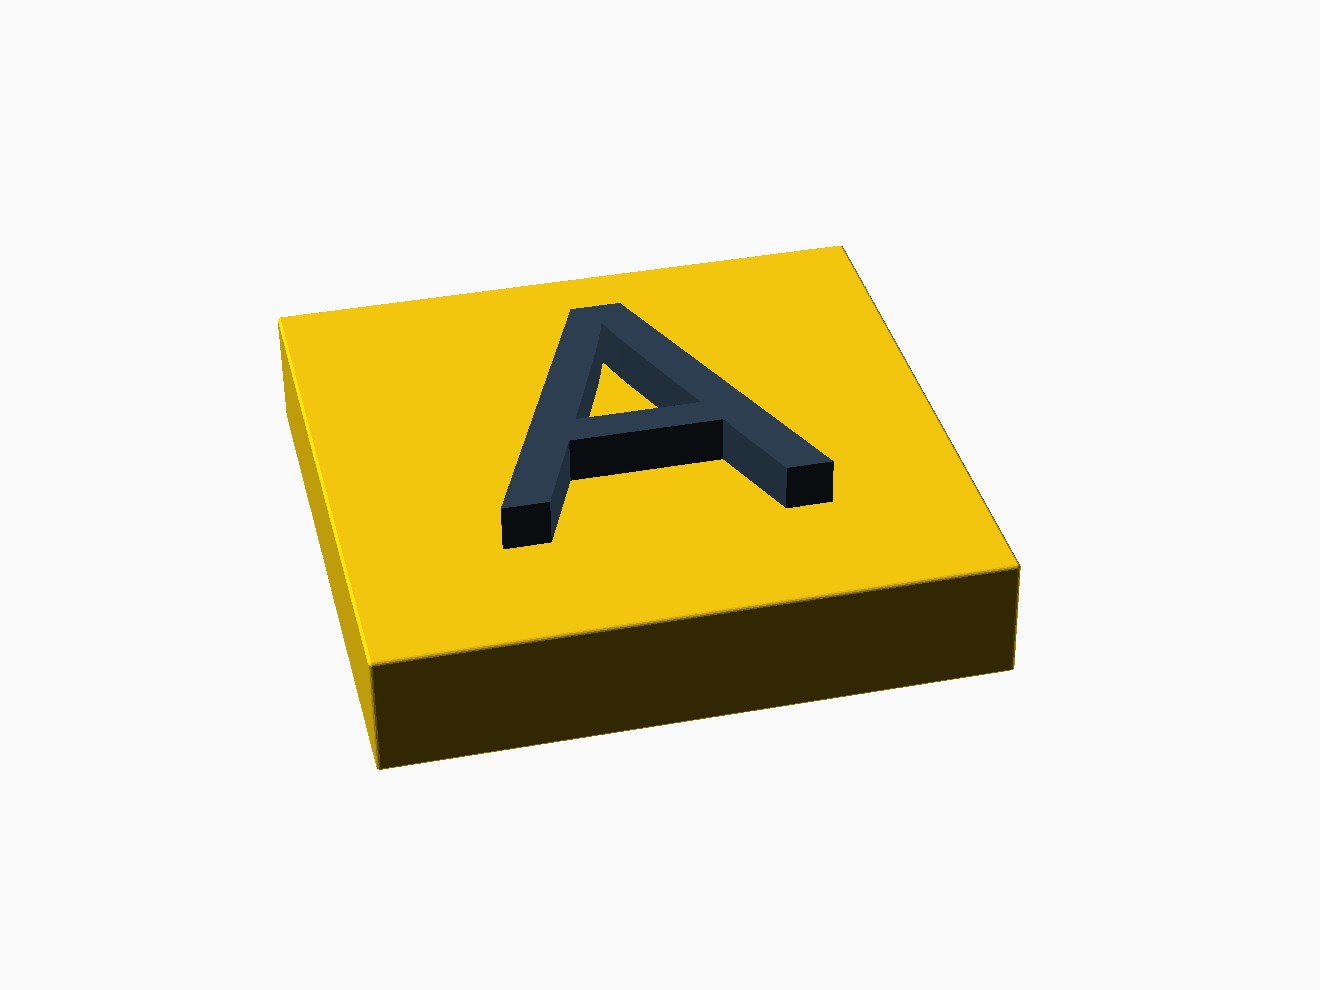 3D printable model of a LEGO 2x2 plate with protruding letter.